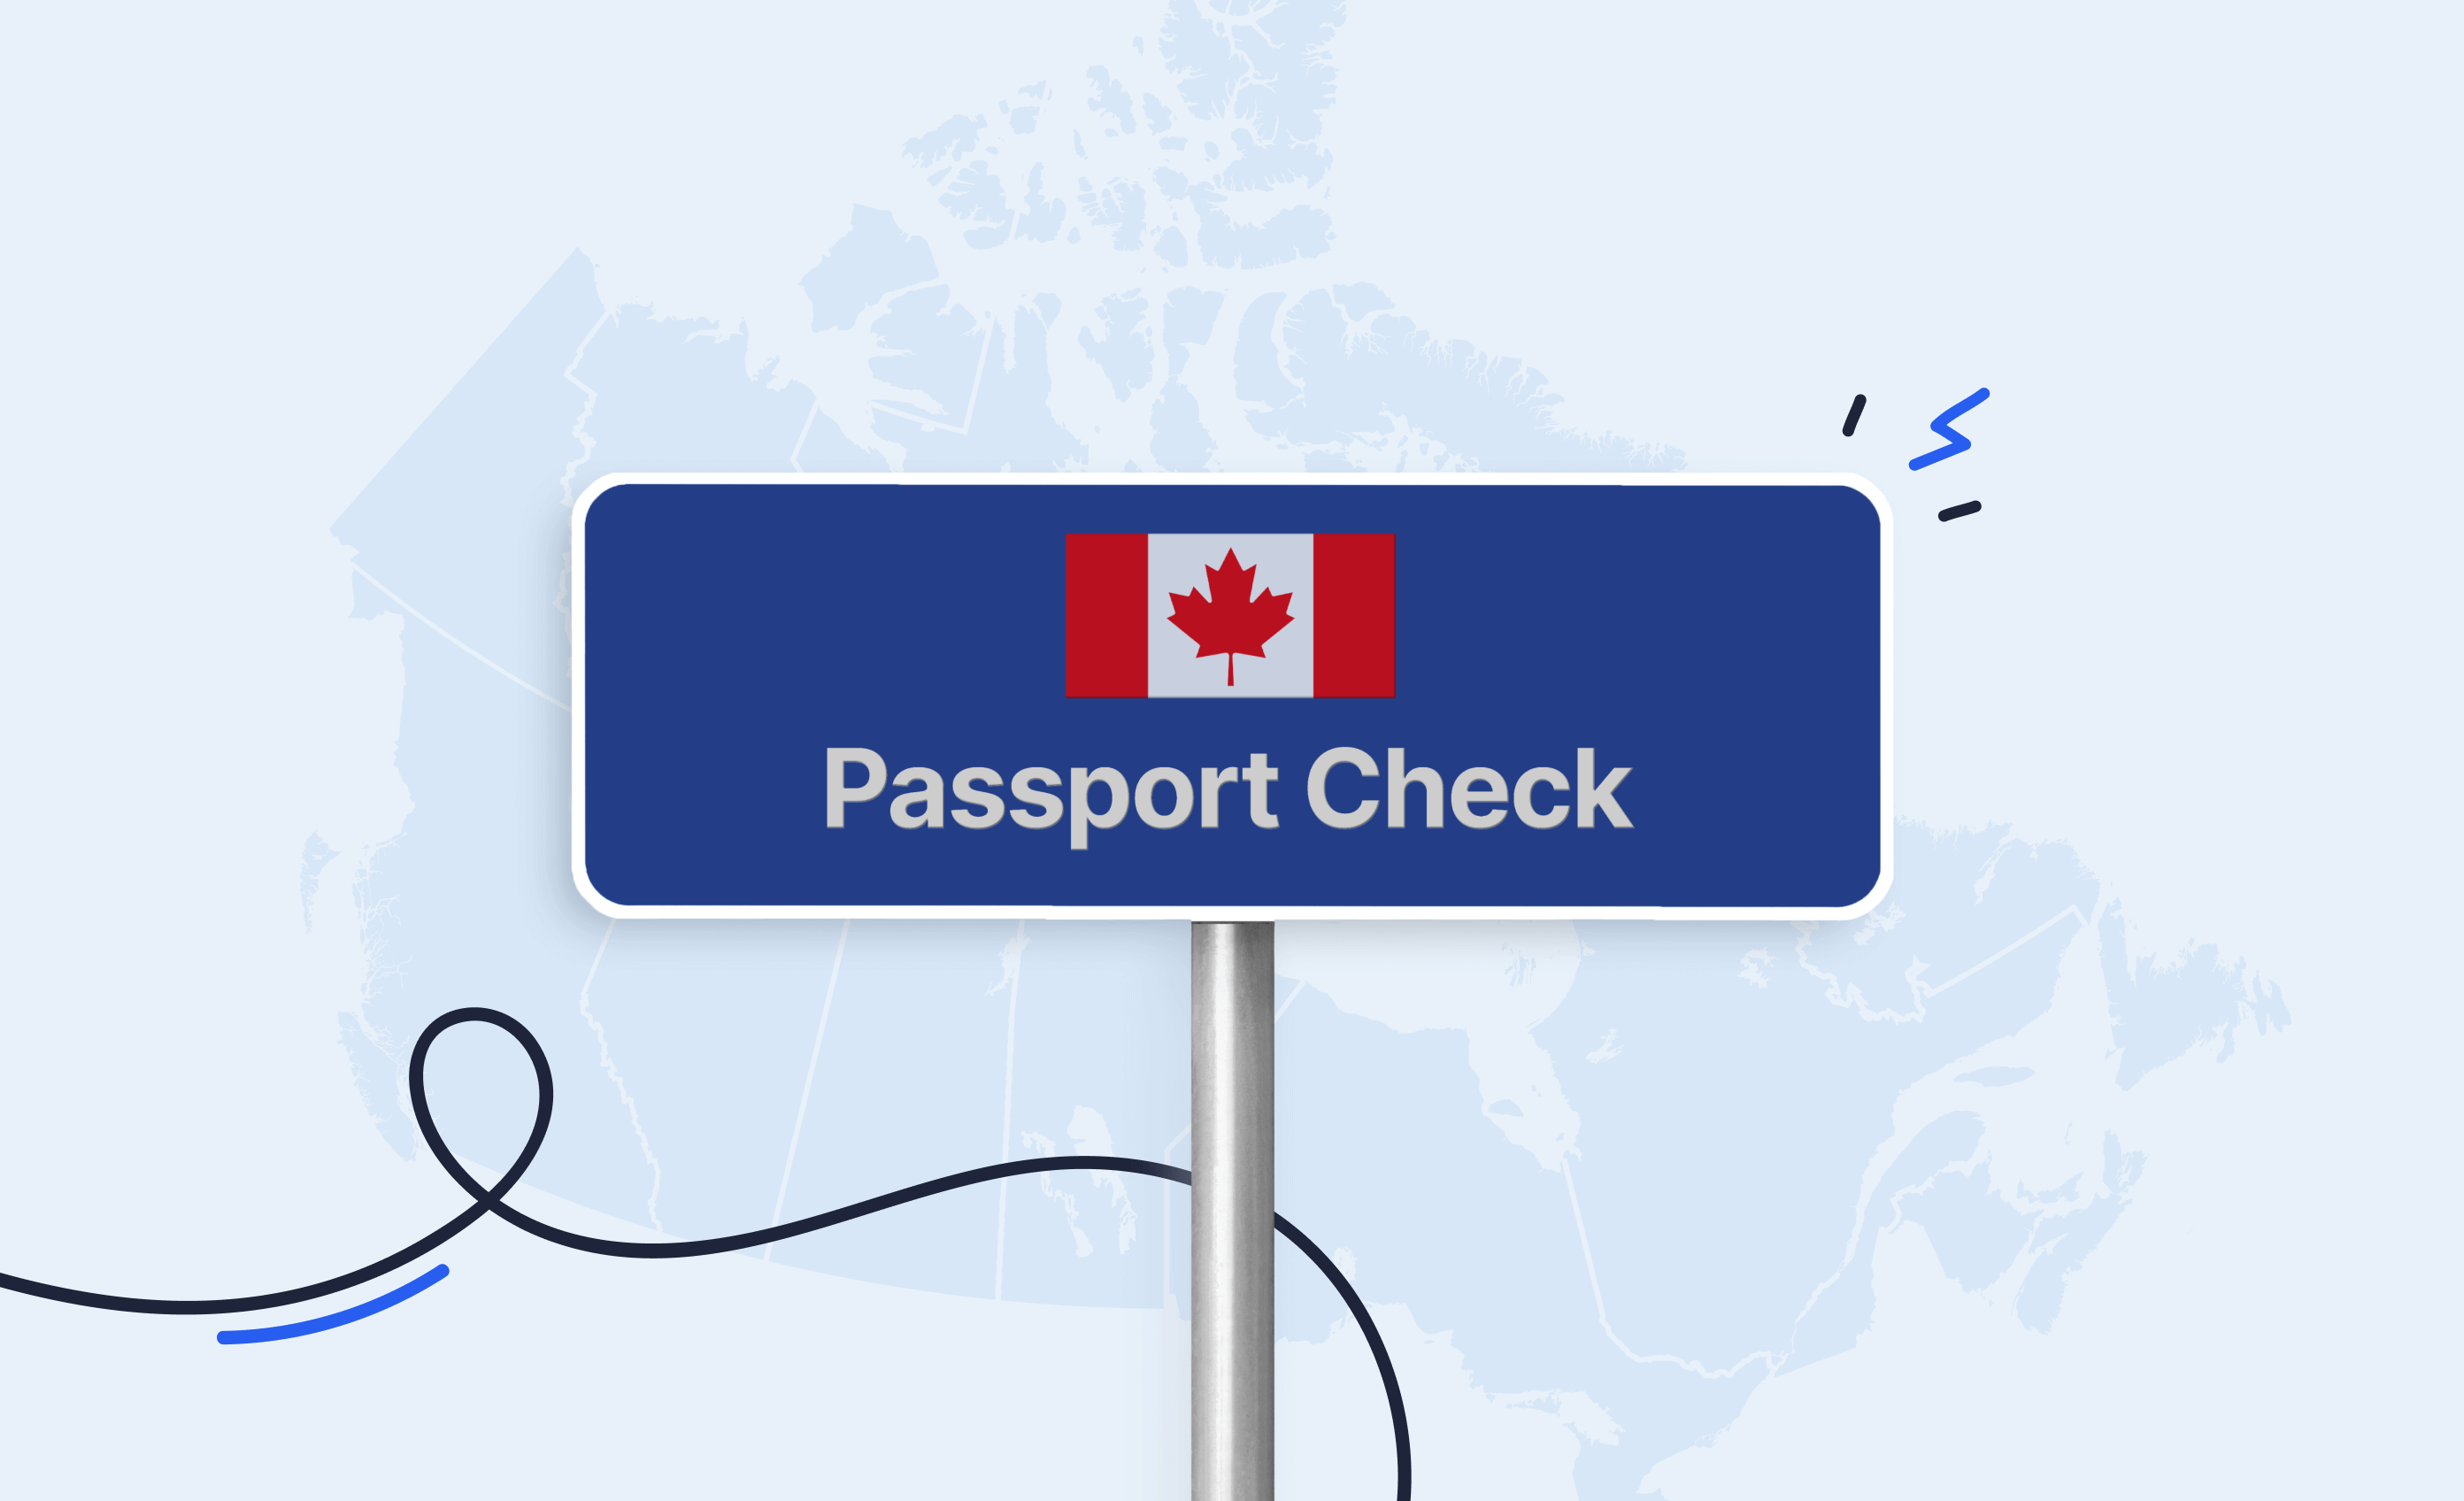 A passport book or recognized travel card (such as an enhanced Driver’s License, NEXUS, or passport card) is necessary to visit Canada.